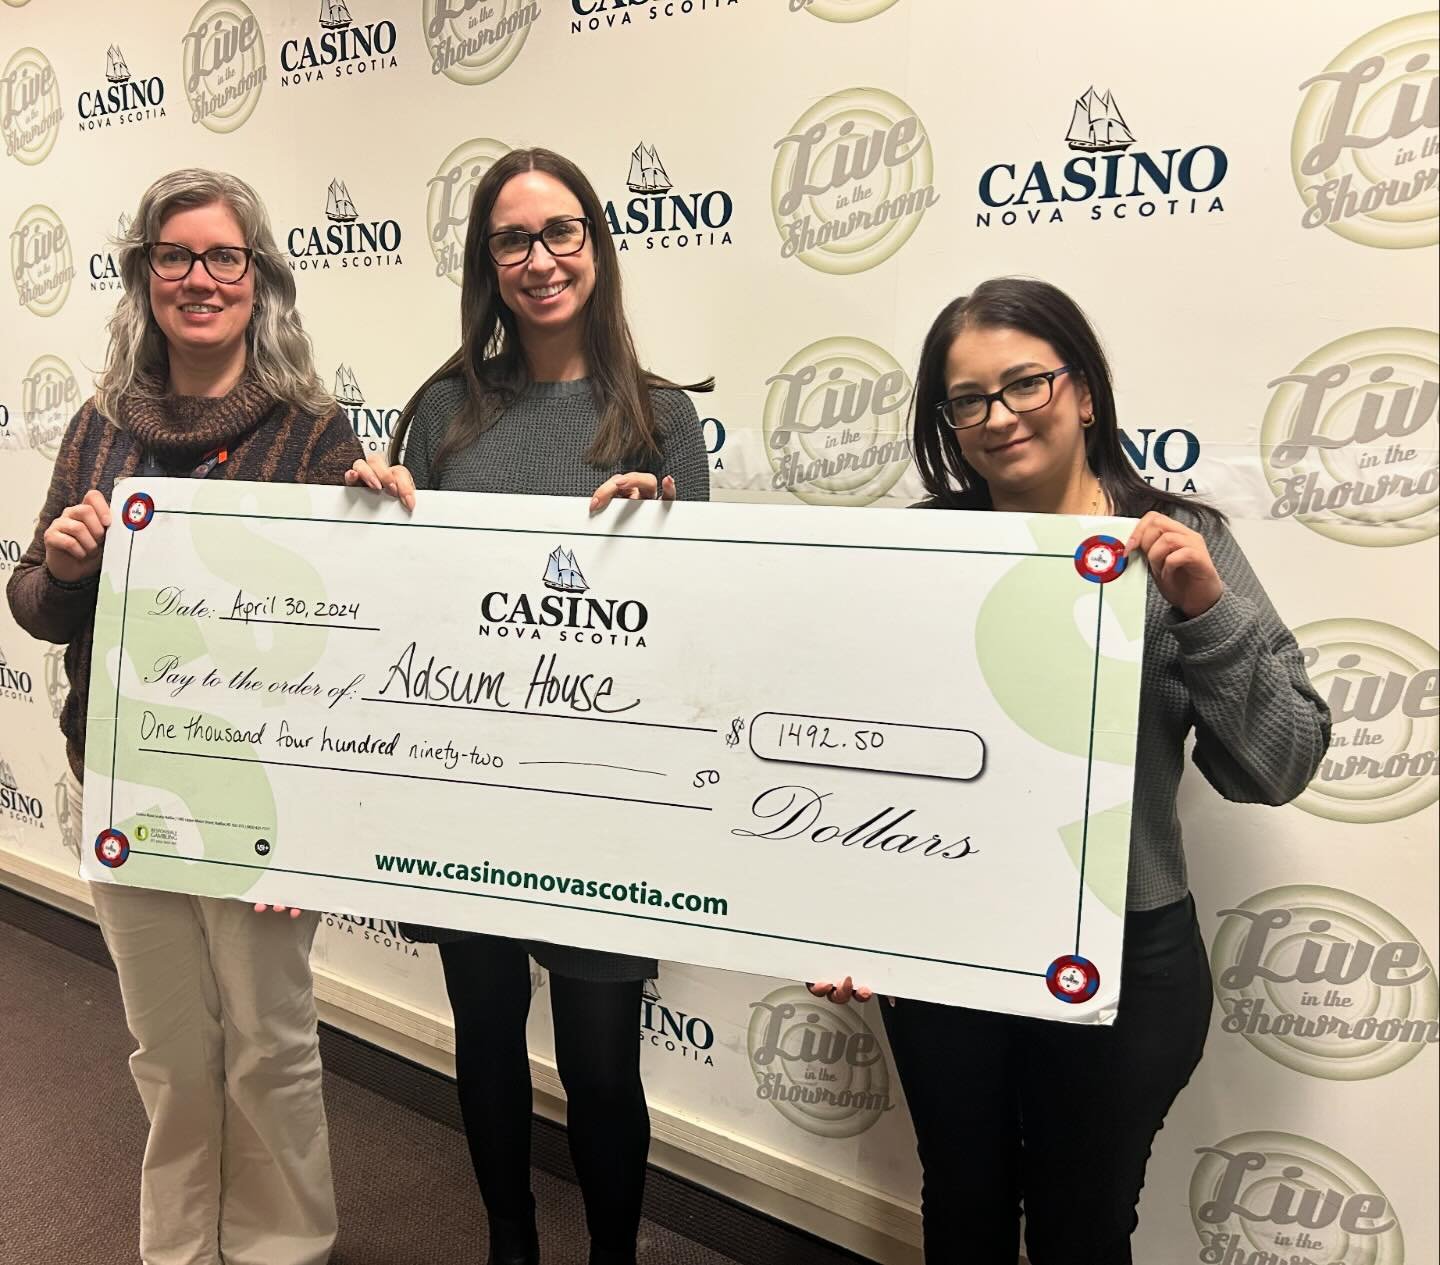 We are honoured to be a 
@casinonovascotia partner for donations from players and staff. Thank you all for your kind support to help people in our community.